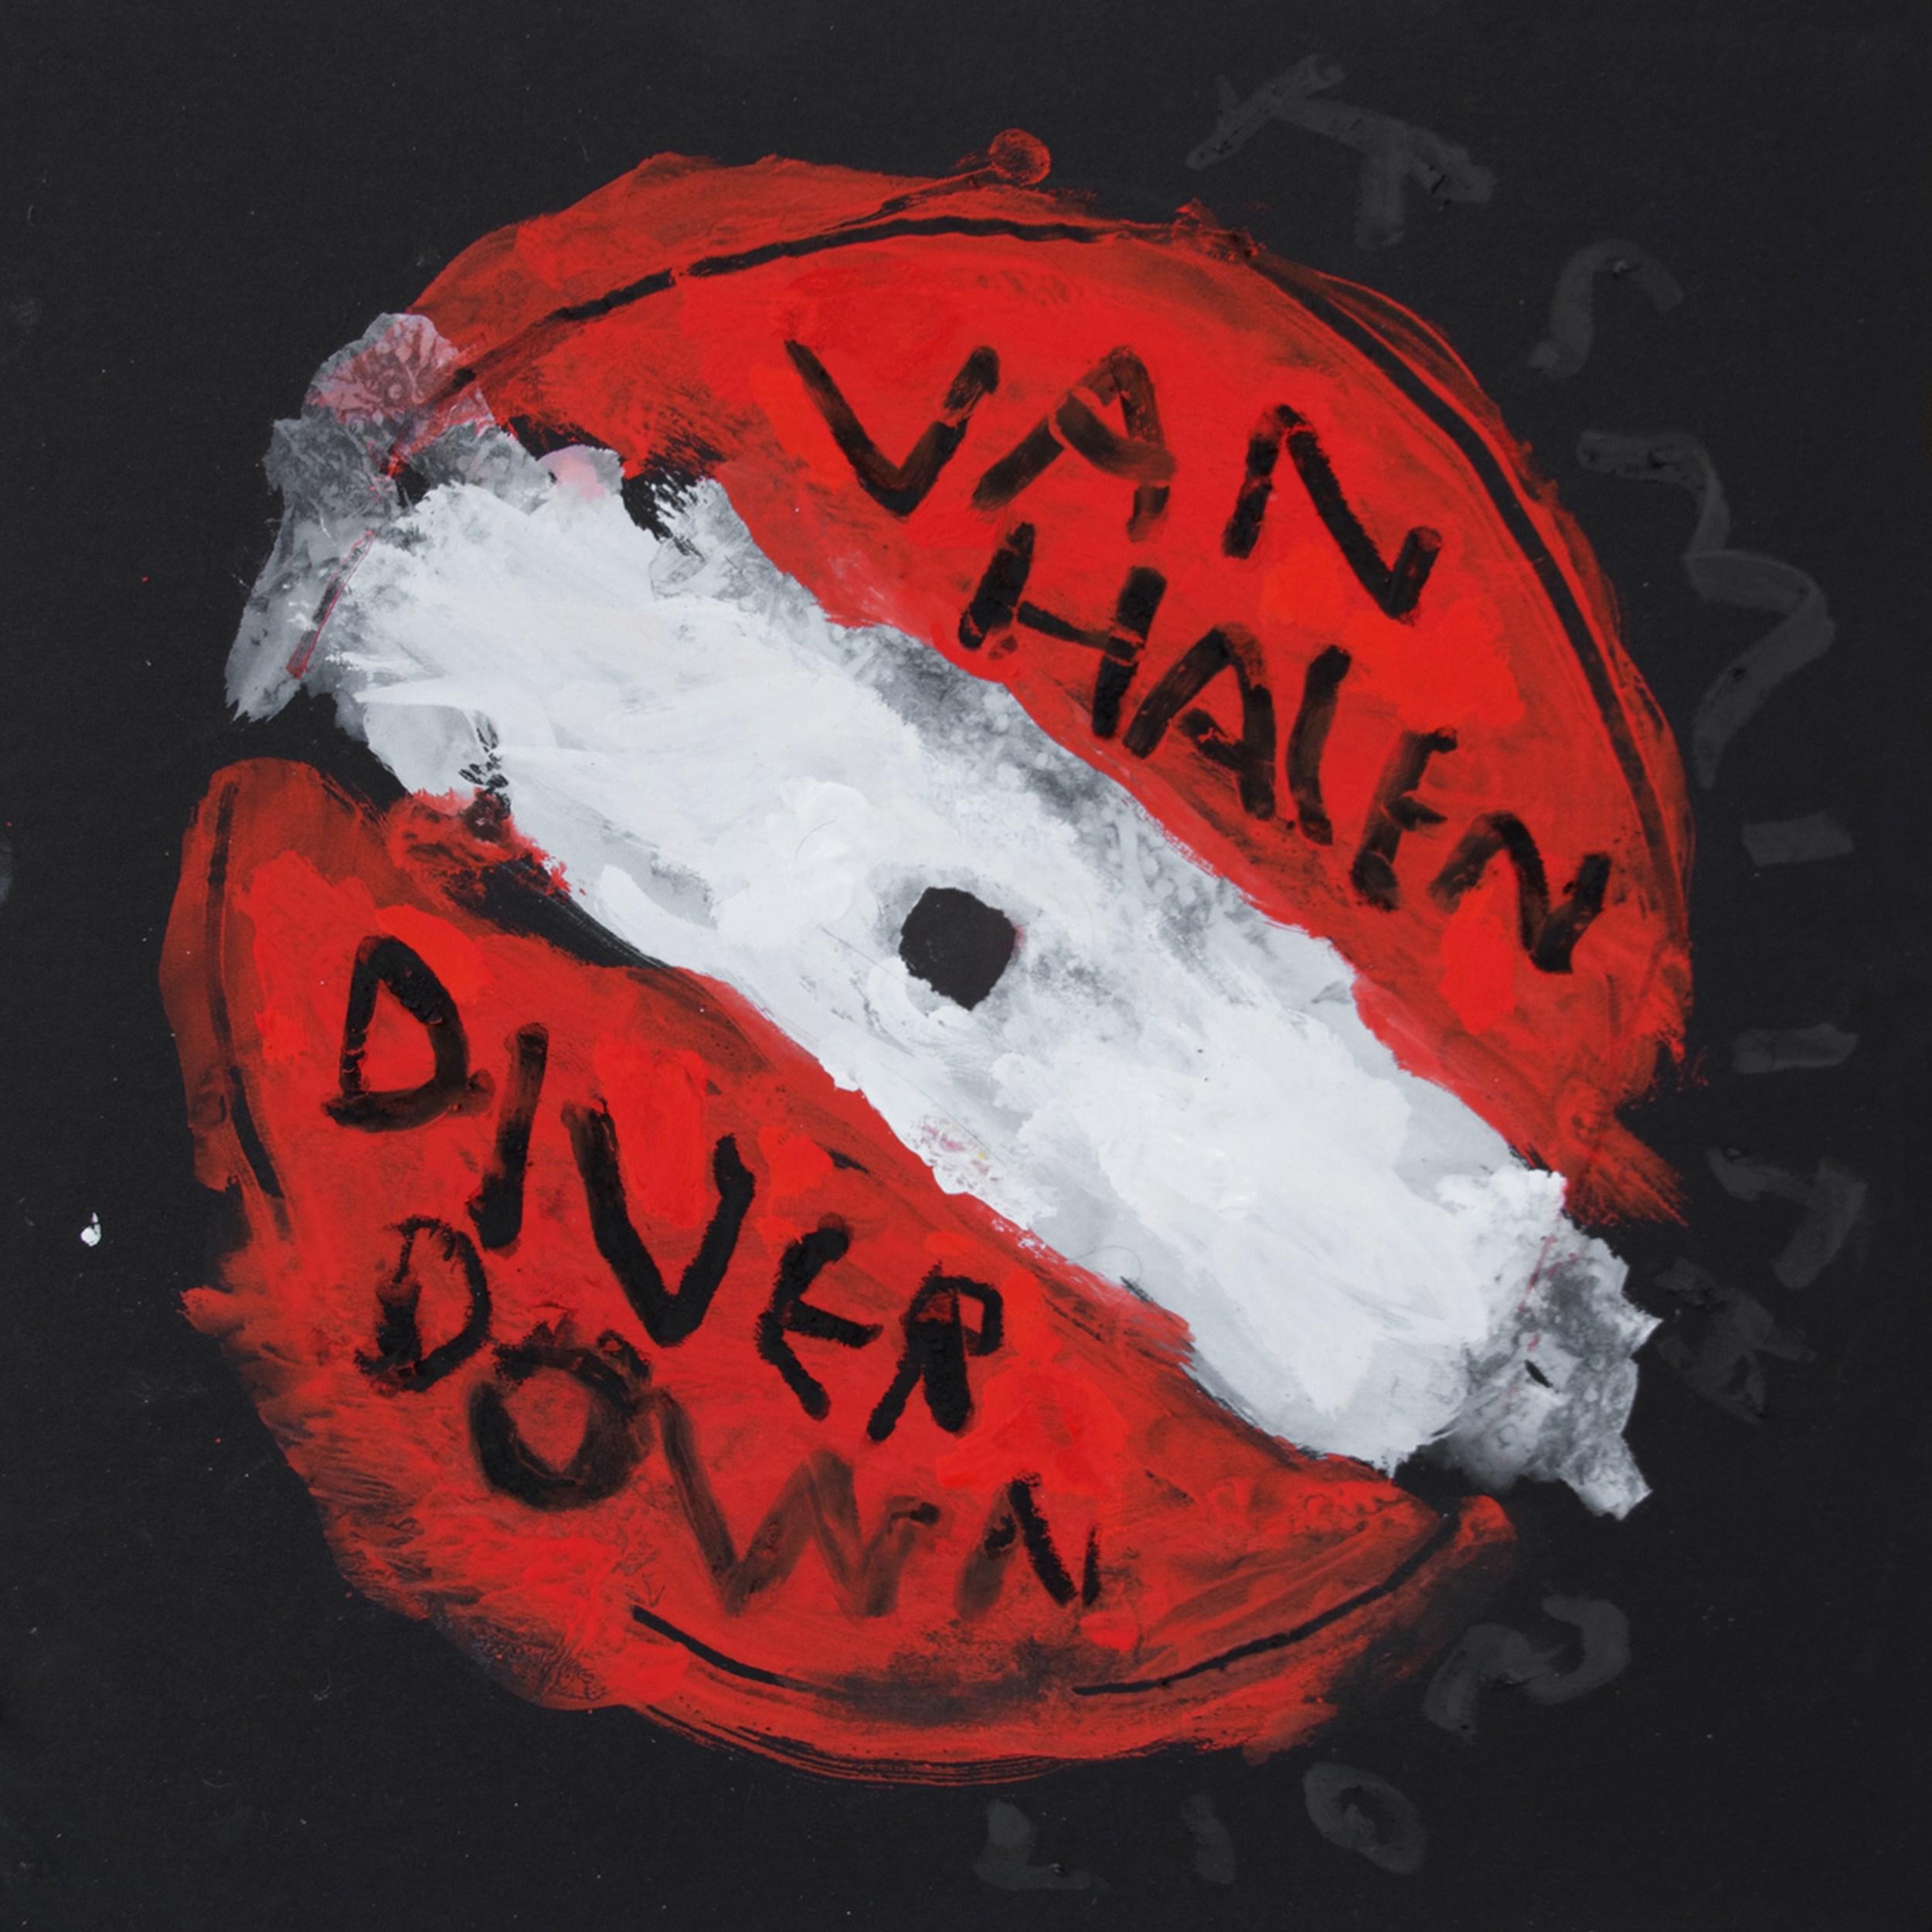 Kerry Smith Abstract Painting - Van Halen - Diver Down (Record Label, Setlists, Contemporary Pop Art)